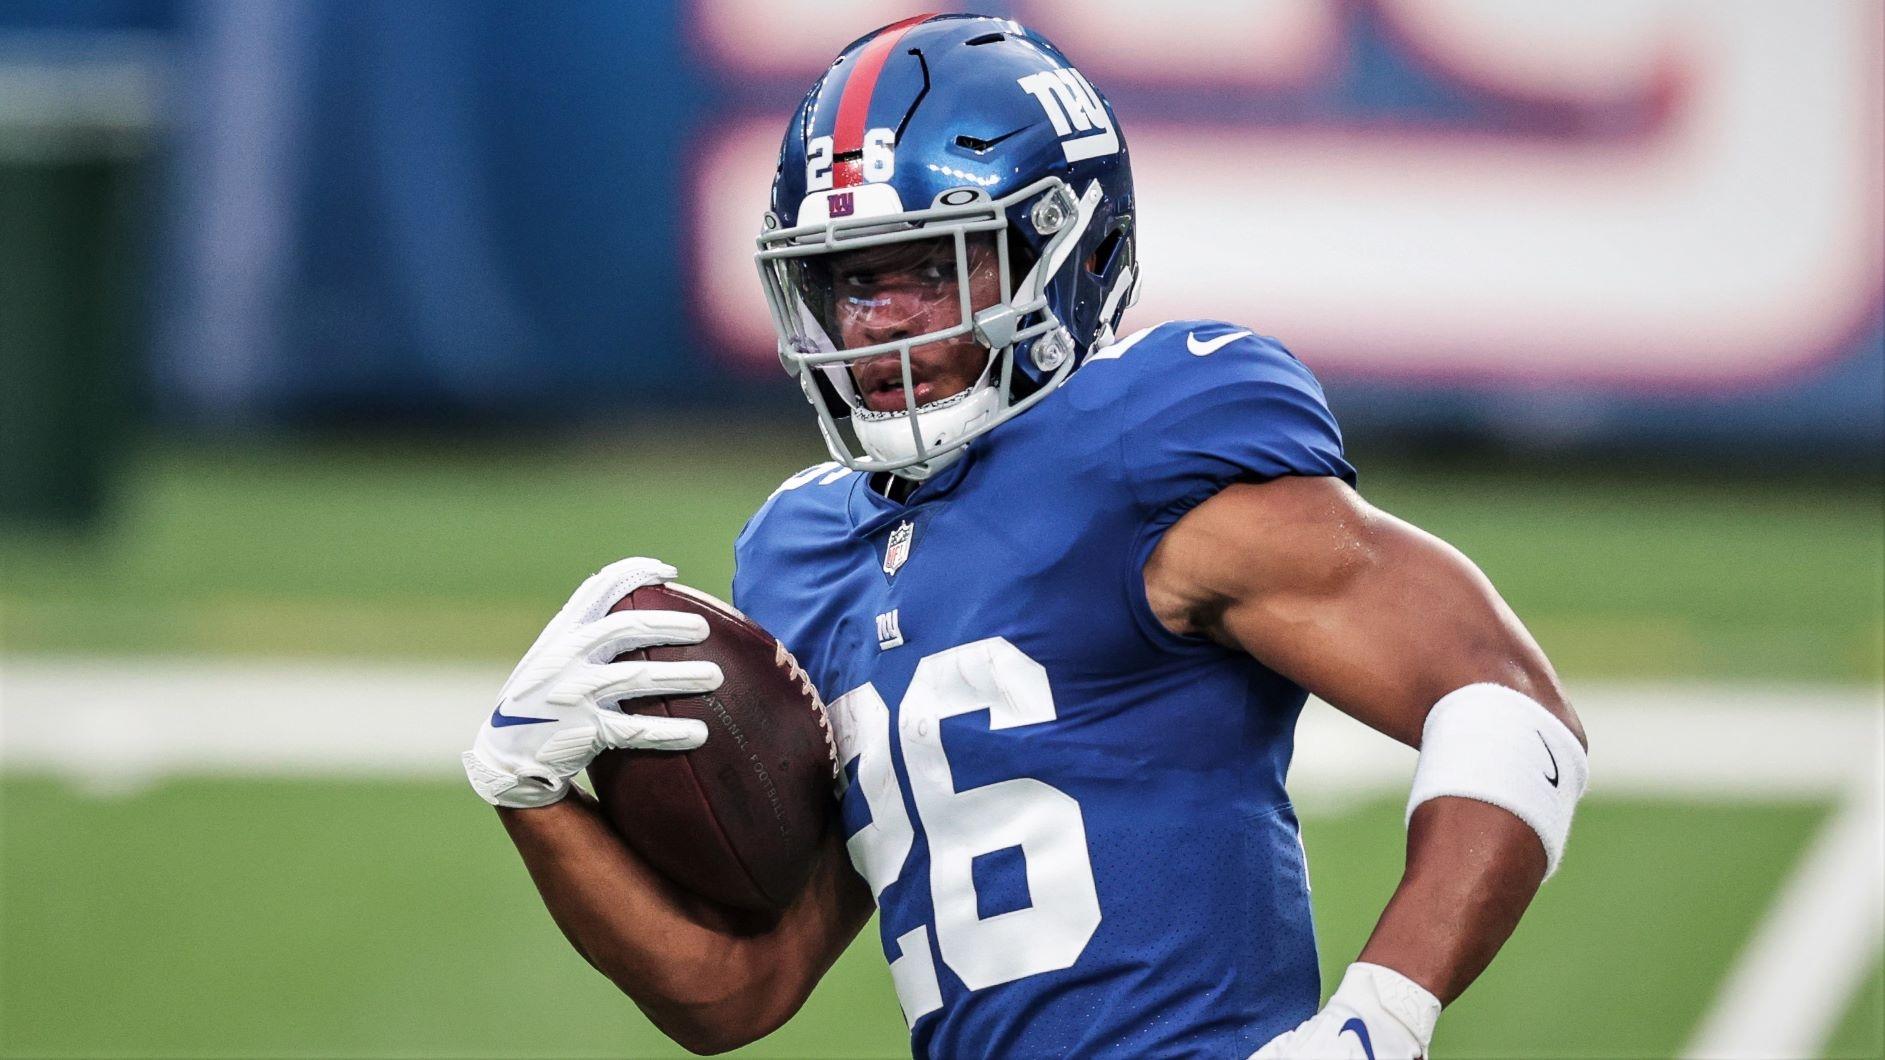 Aug 28, 2020; East Rutherford, New Jersey, USA; New York Giants running back Saquon Barkley (26) runs with the ball before the Blue-White Scrimmage at MetLife Stadium. / Vincent Carchietta-USA TODAY Sports